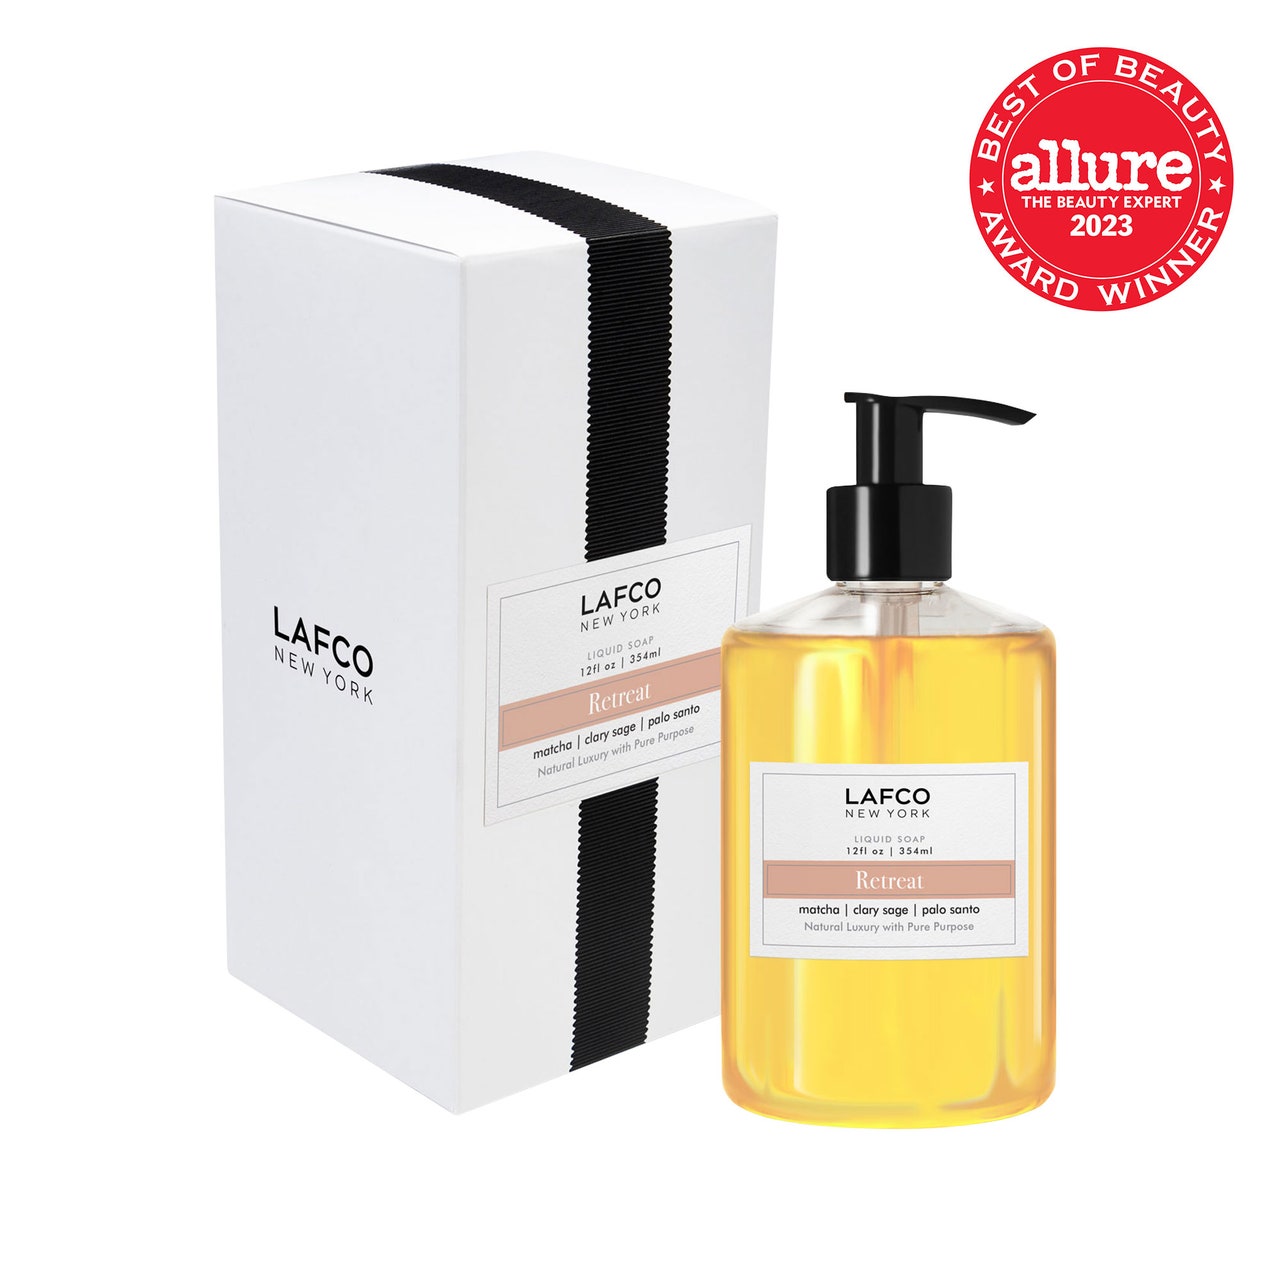 LAFCO New York Retreat Liquid Soap transparent bottle of yellow hand soap with black pump and box on white background with red Allure BoB seal in the top right corner